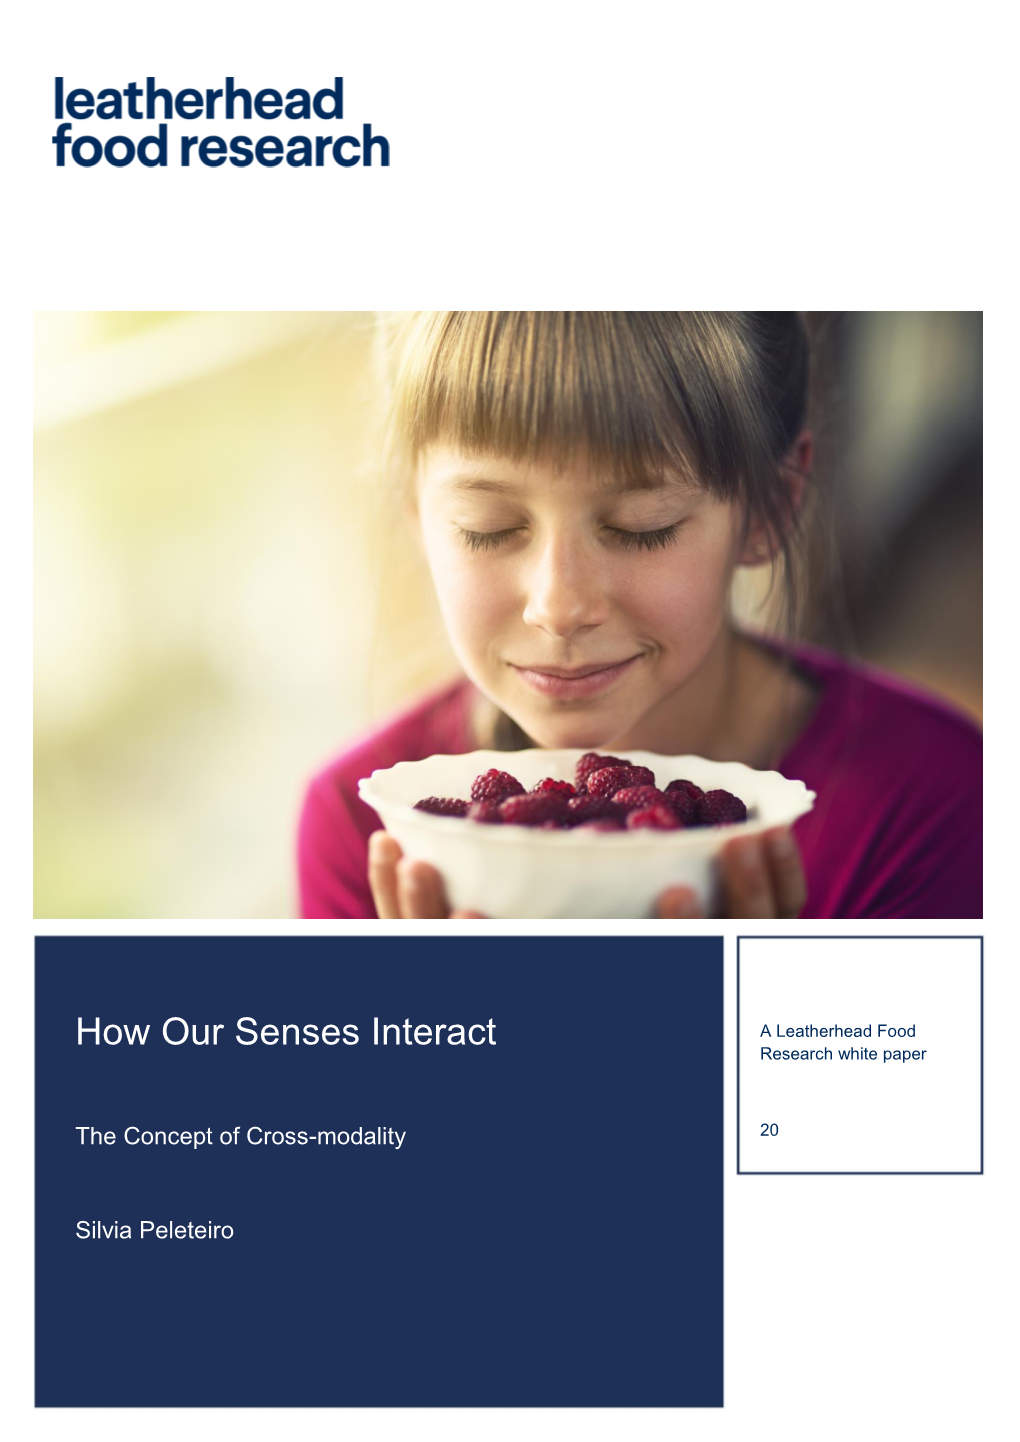 How Our Senses Interact a Leatherhead Food Research White Paper